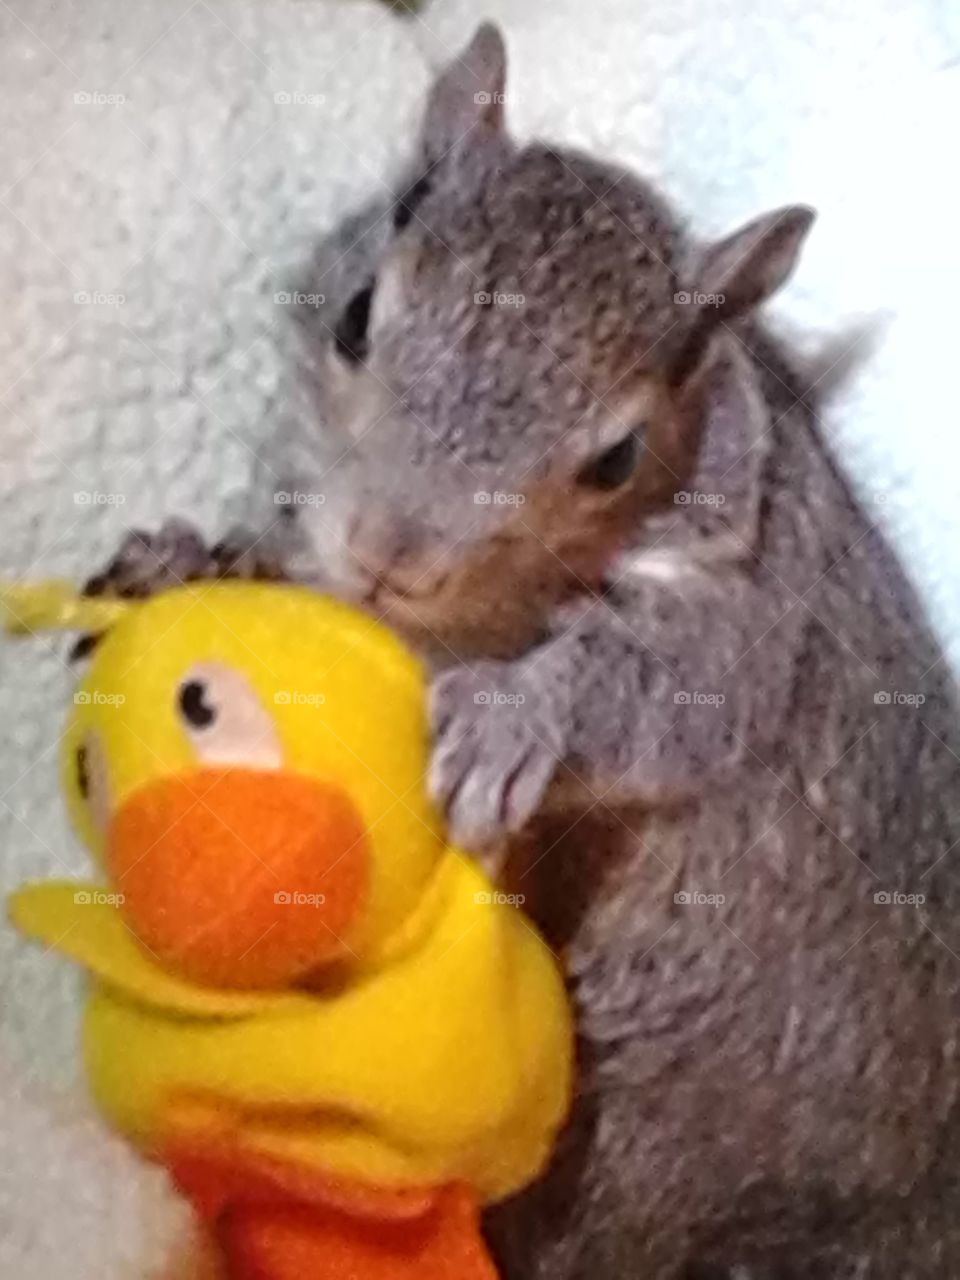 Hope and her ducky